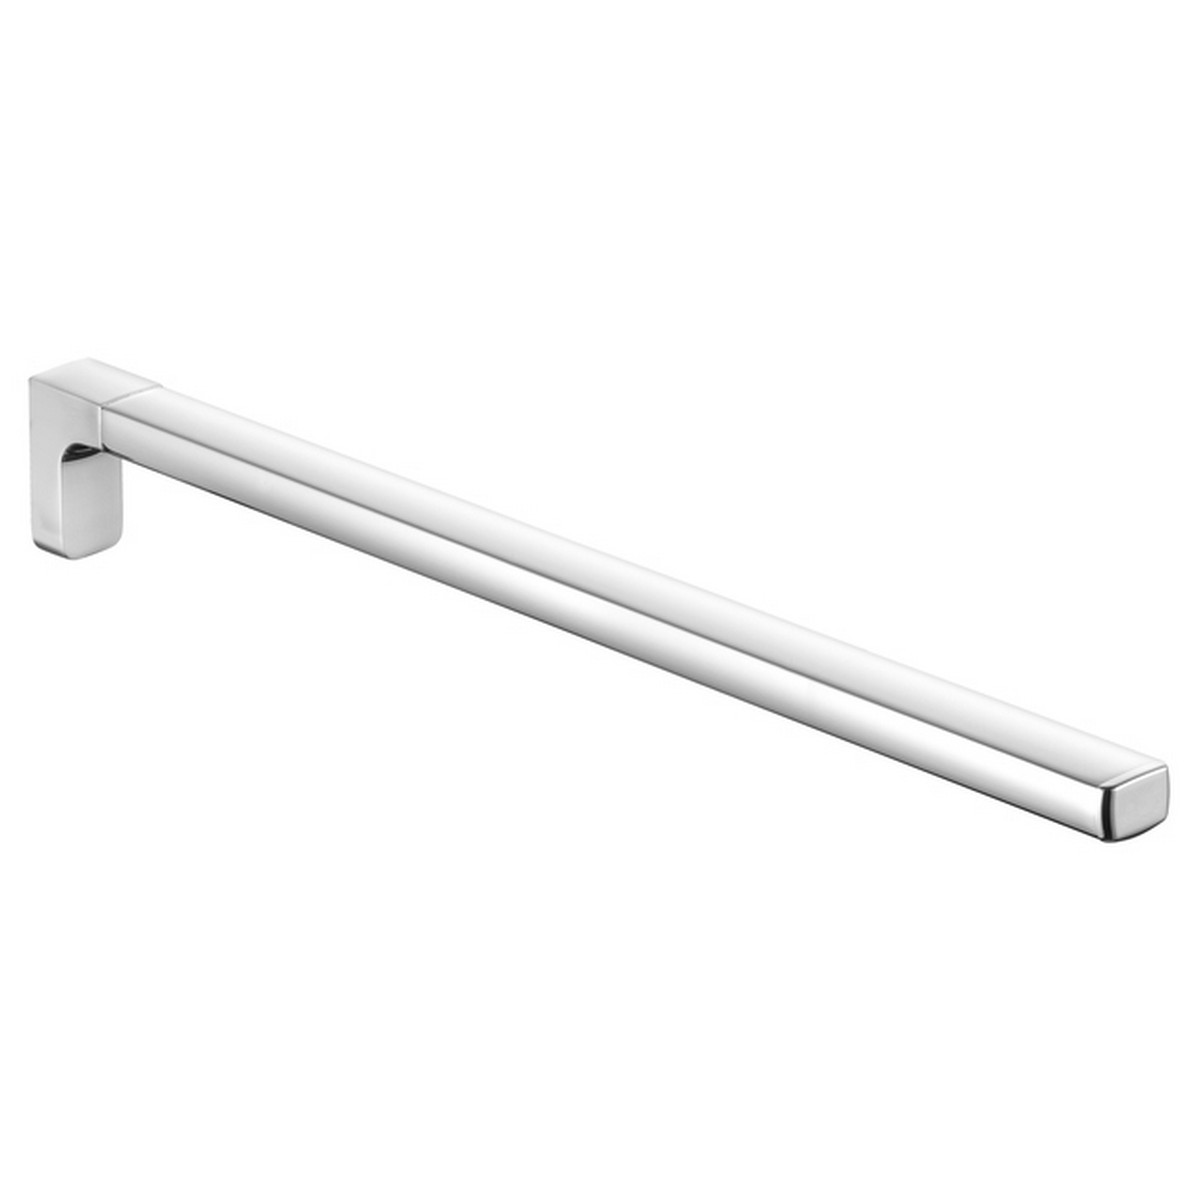 KEUCO 12720010000 MOLL 17 3/4 INCH WALL MOUNTED SINGLE TOWEL HOLDER IN POLISHED CHROME